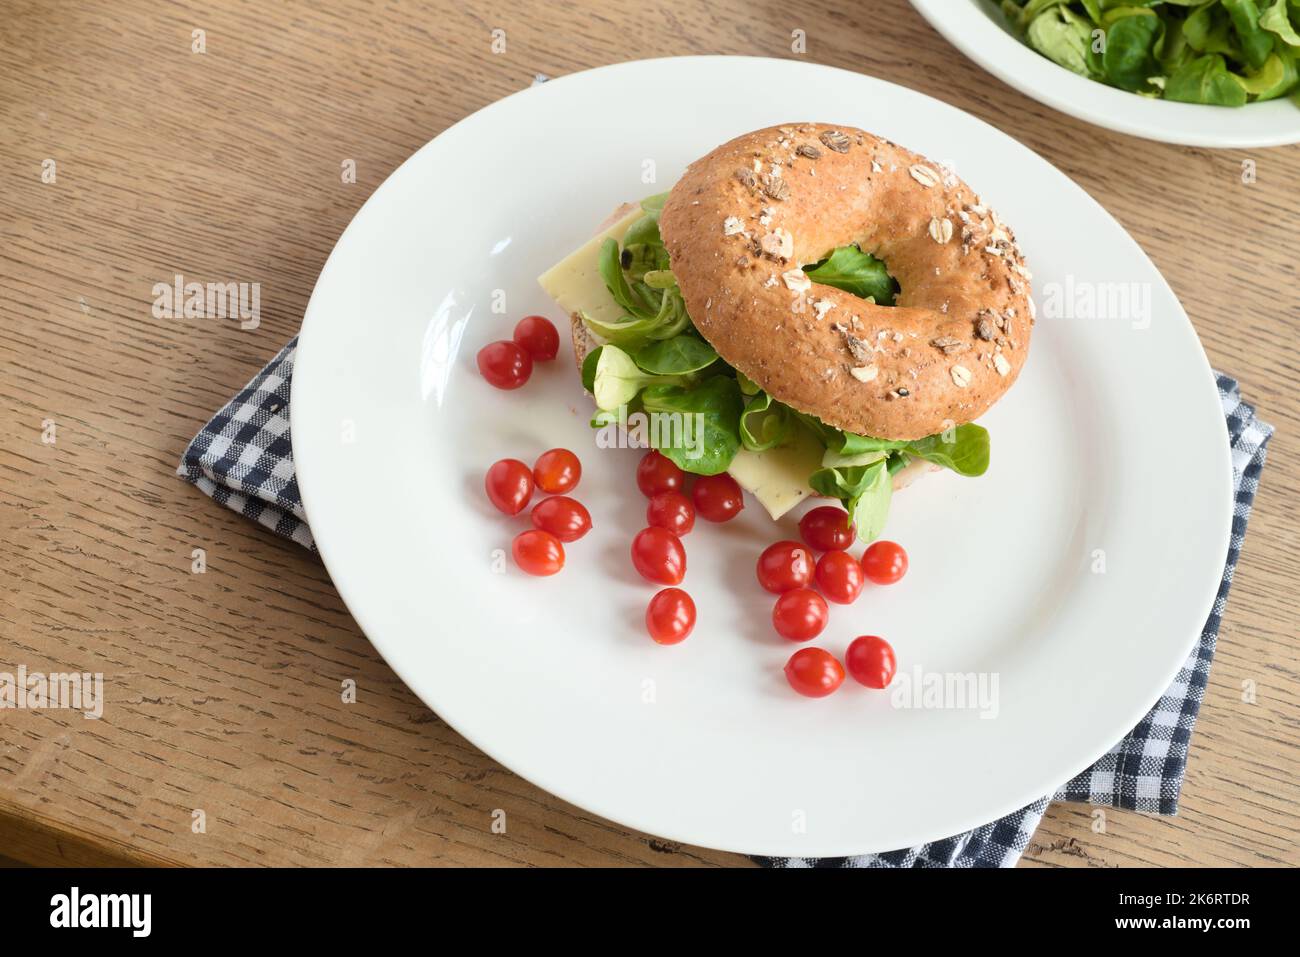 Bagel sandwich with cheese, green lettuce leaves, and cherry tomatoes on a plate Stock Photo